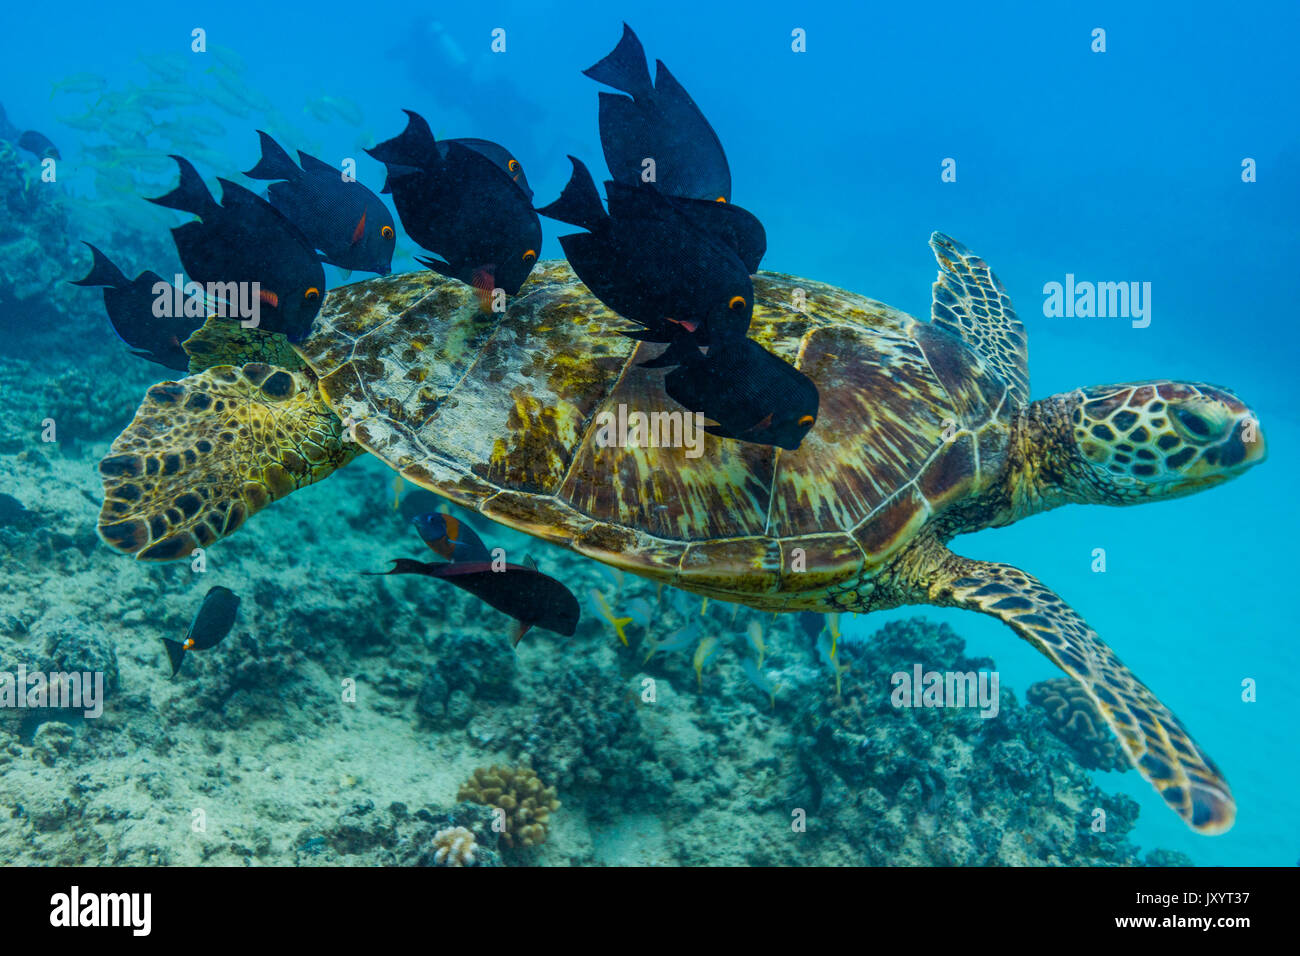 Fish nibbling shell of swimming sea turtle Stock Photo